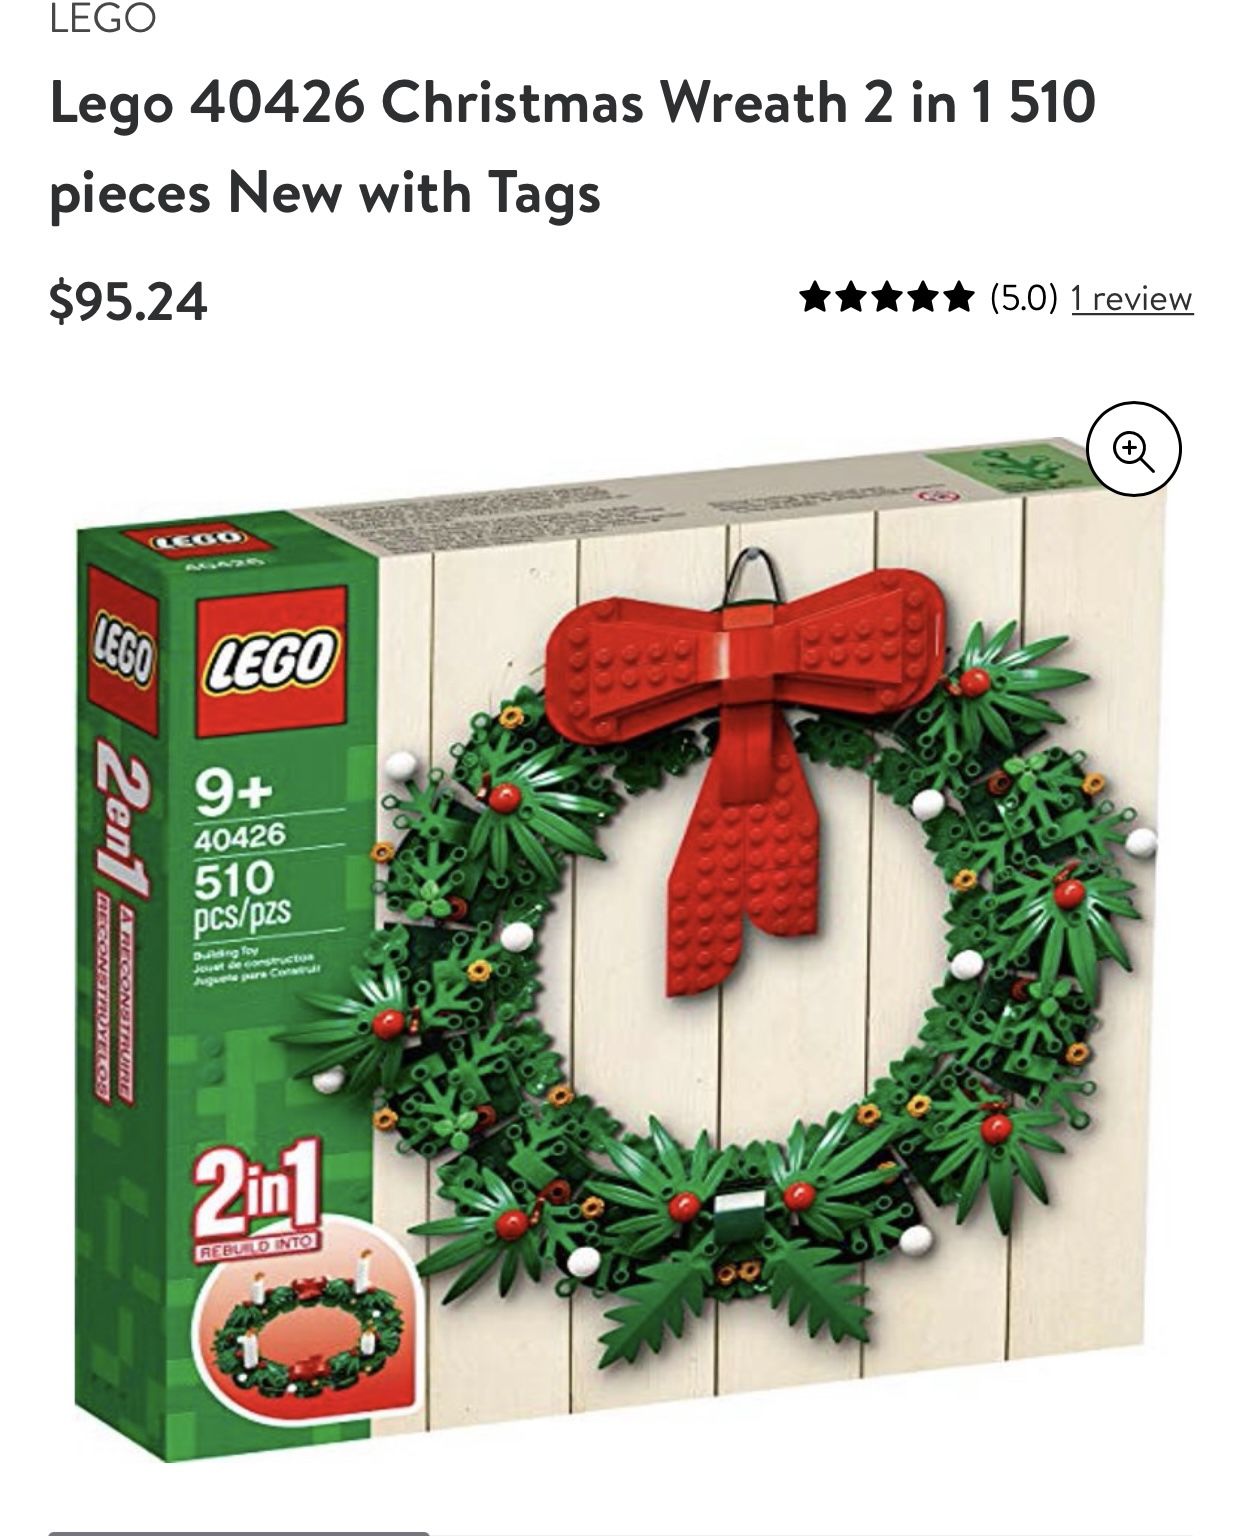 Lego 40426 Christmas Wreath 2 in 1 510 pieces